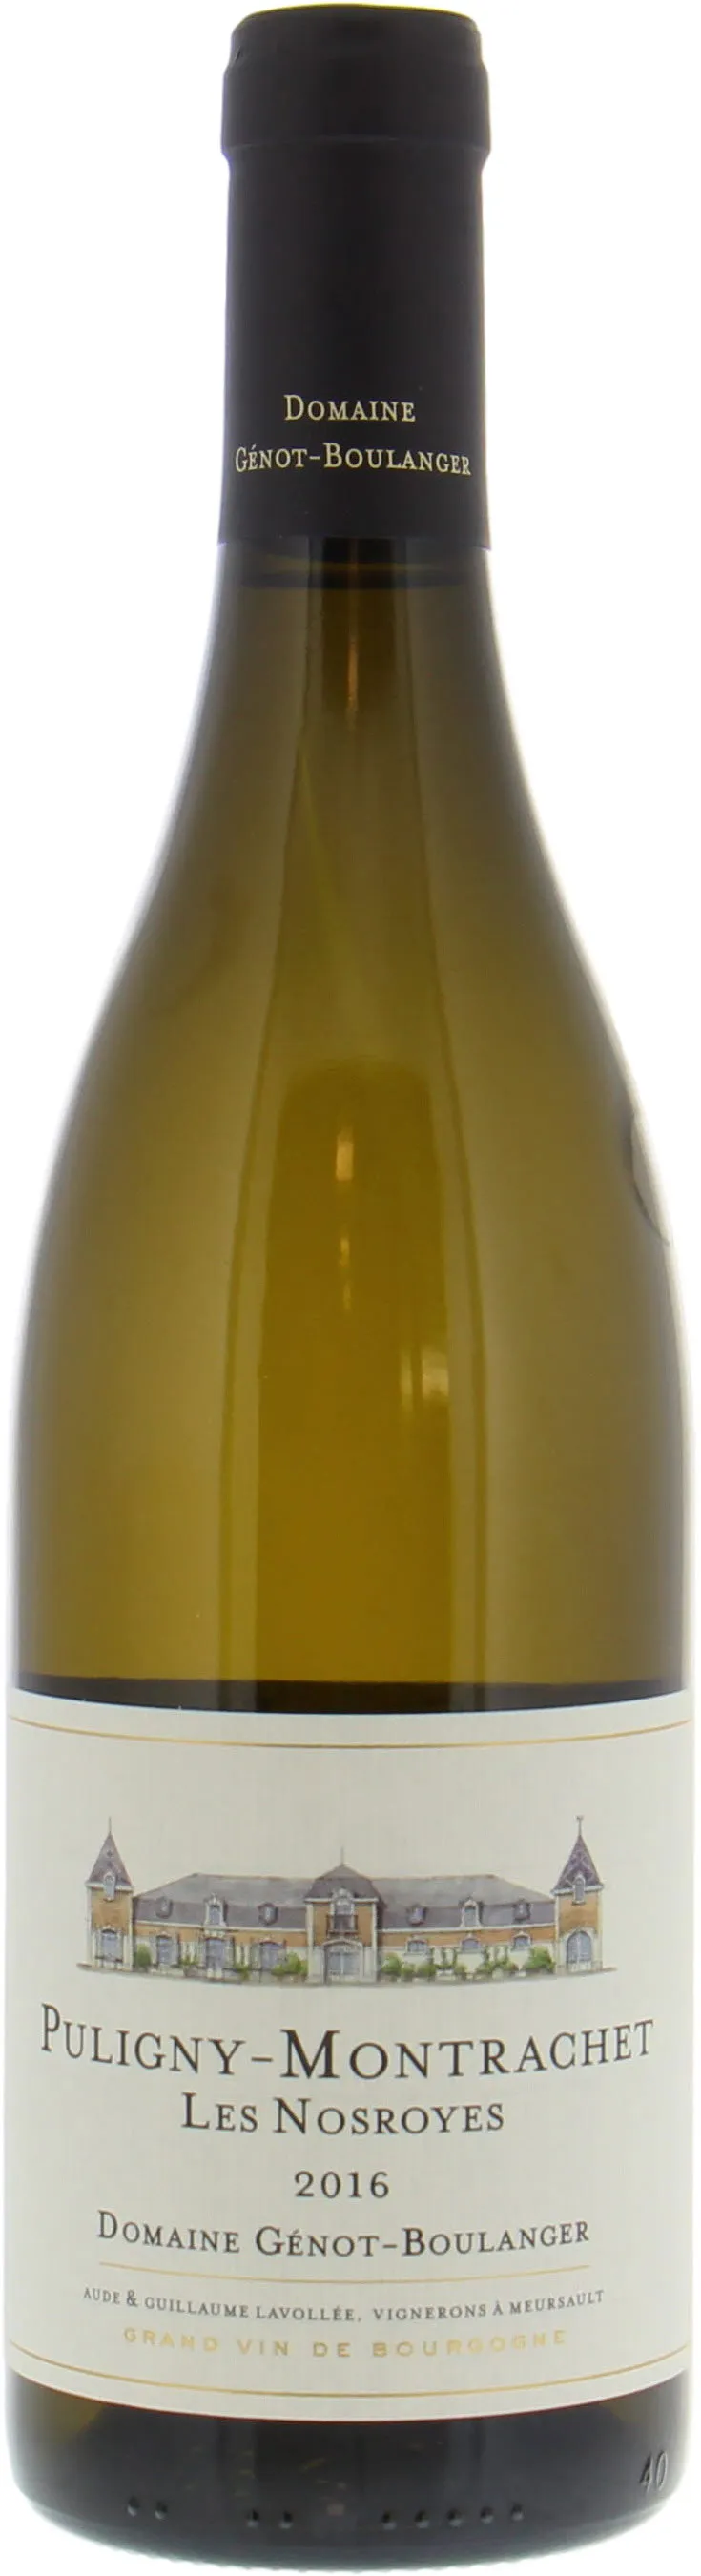 Bottle of Domaine Génot-Boulanger Puligny-Montrachet Les Nosroyes from search results